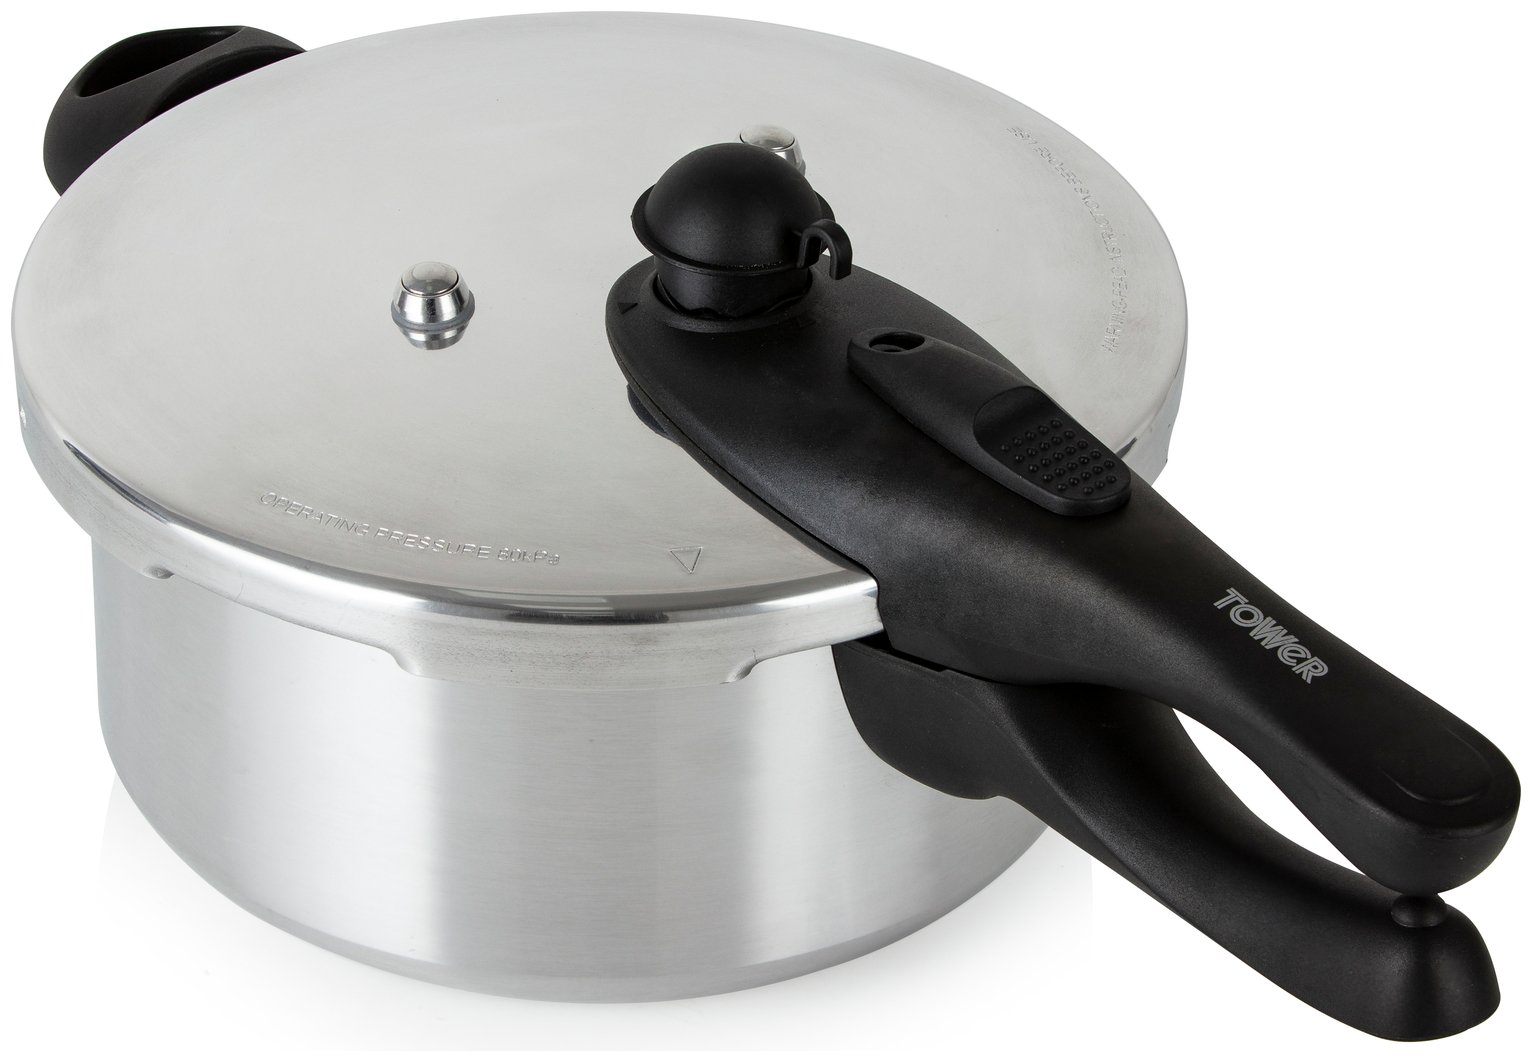 Tower Compact 4 Litre Pressure Cooker review